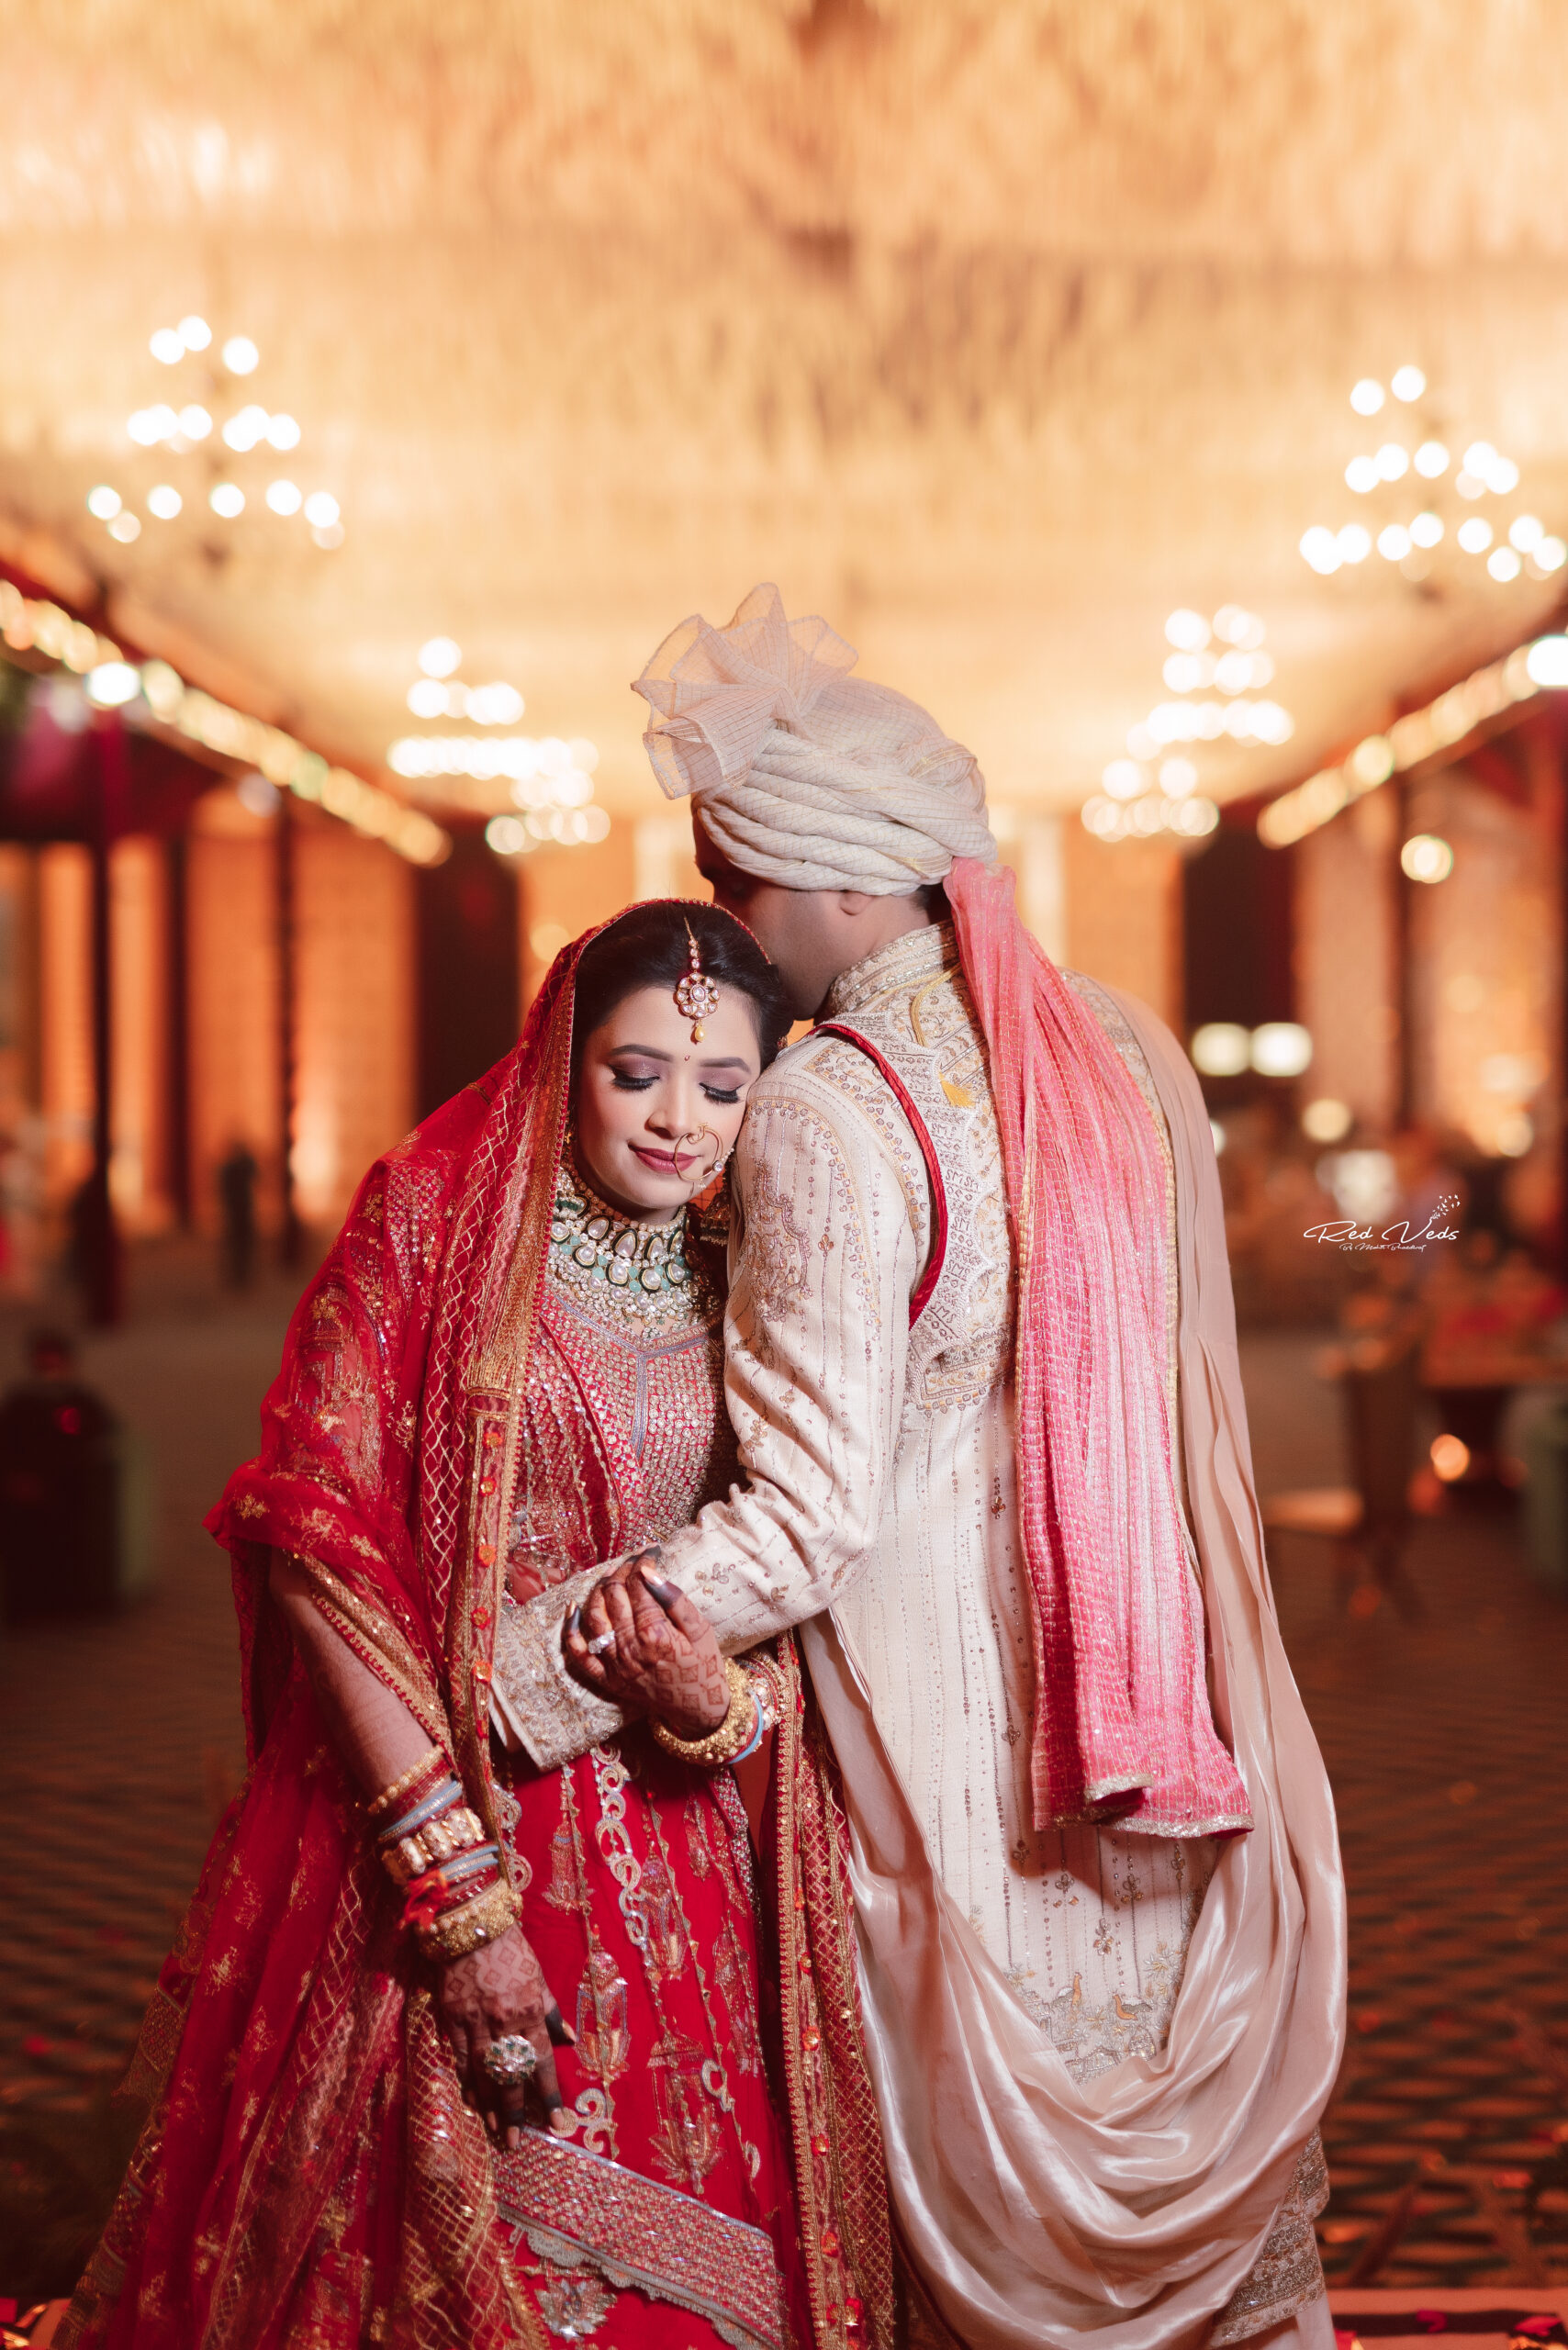 Tushar photography | Haldi ceremony outfit, Wedding couple poses, Indian  bride photography poses